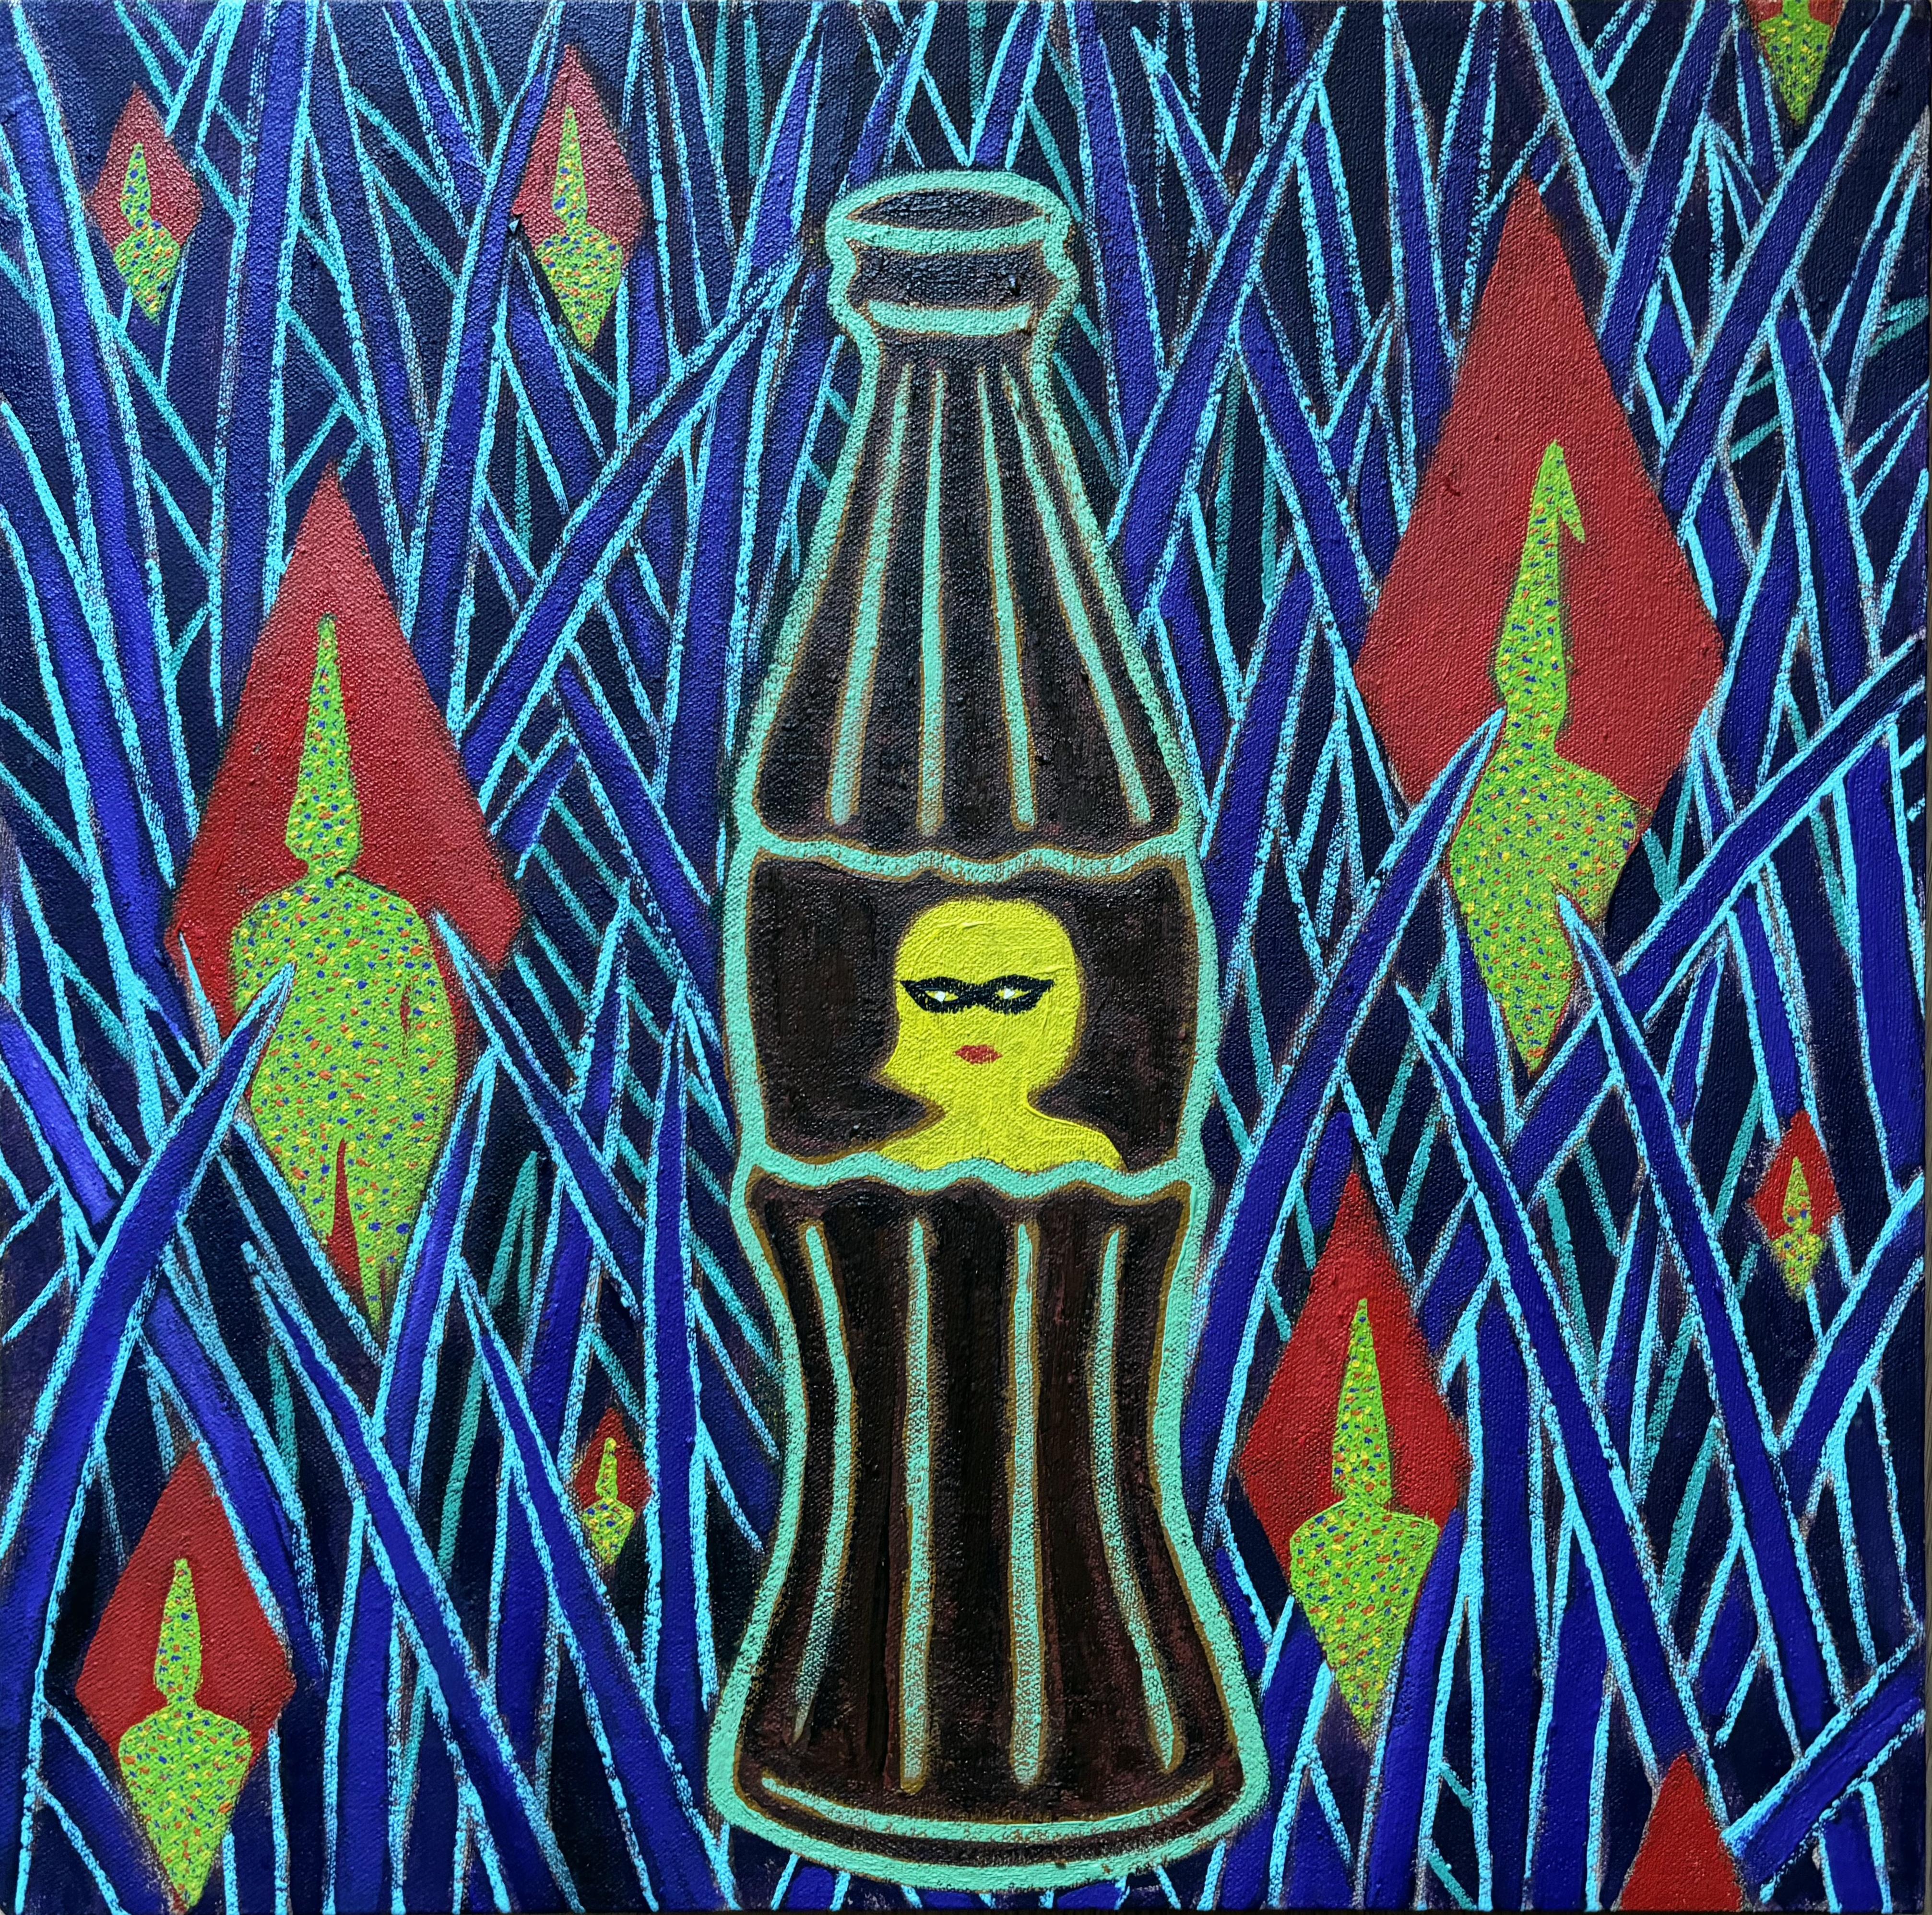 FPA Francis Pavy Artist Abstract Painting - Donna Coca Cola with Diamonds and Les Courir de Bois